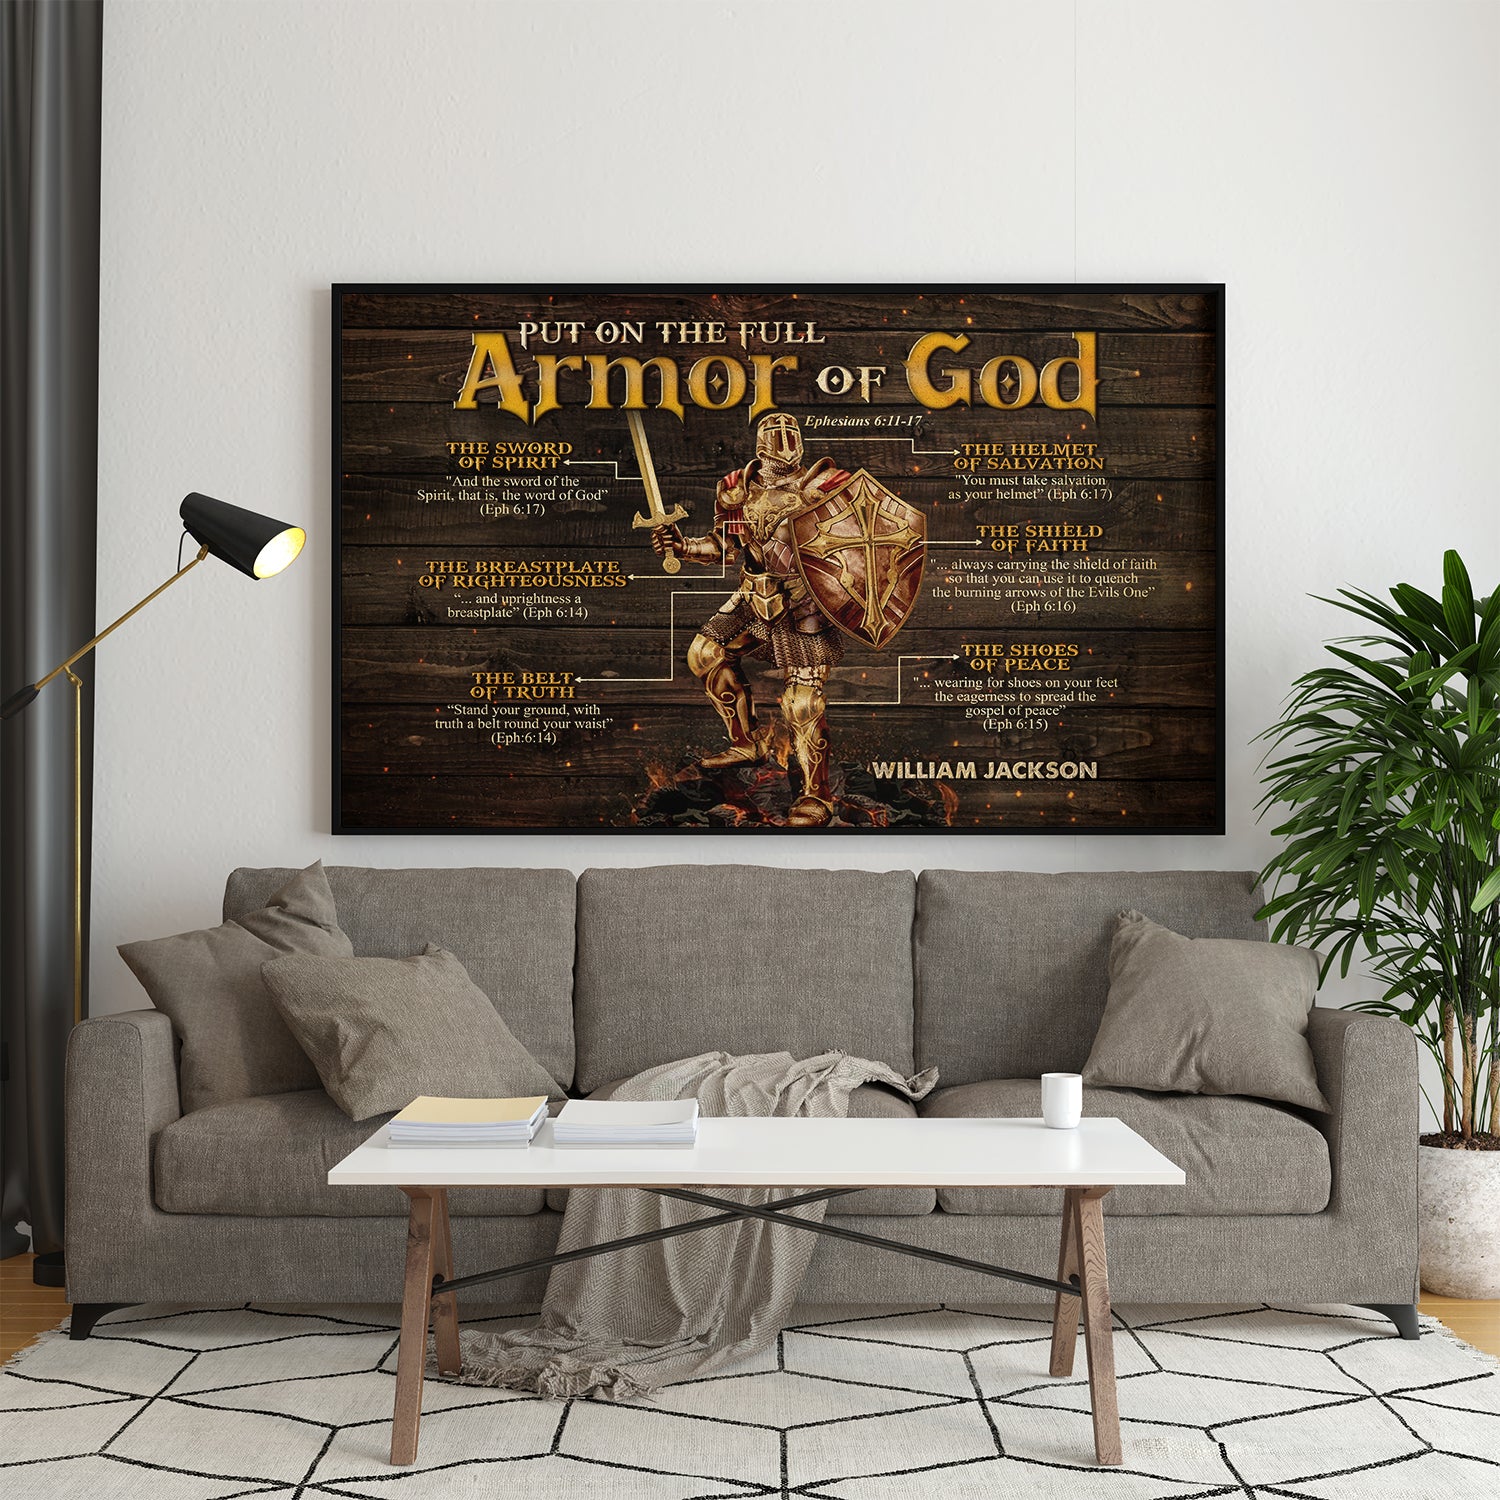 Personalized Warrior Of God Poster, Put On The Full Armor Of God, Armor Of God Bible Verse